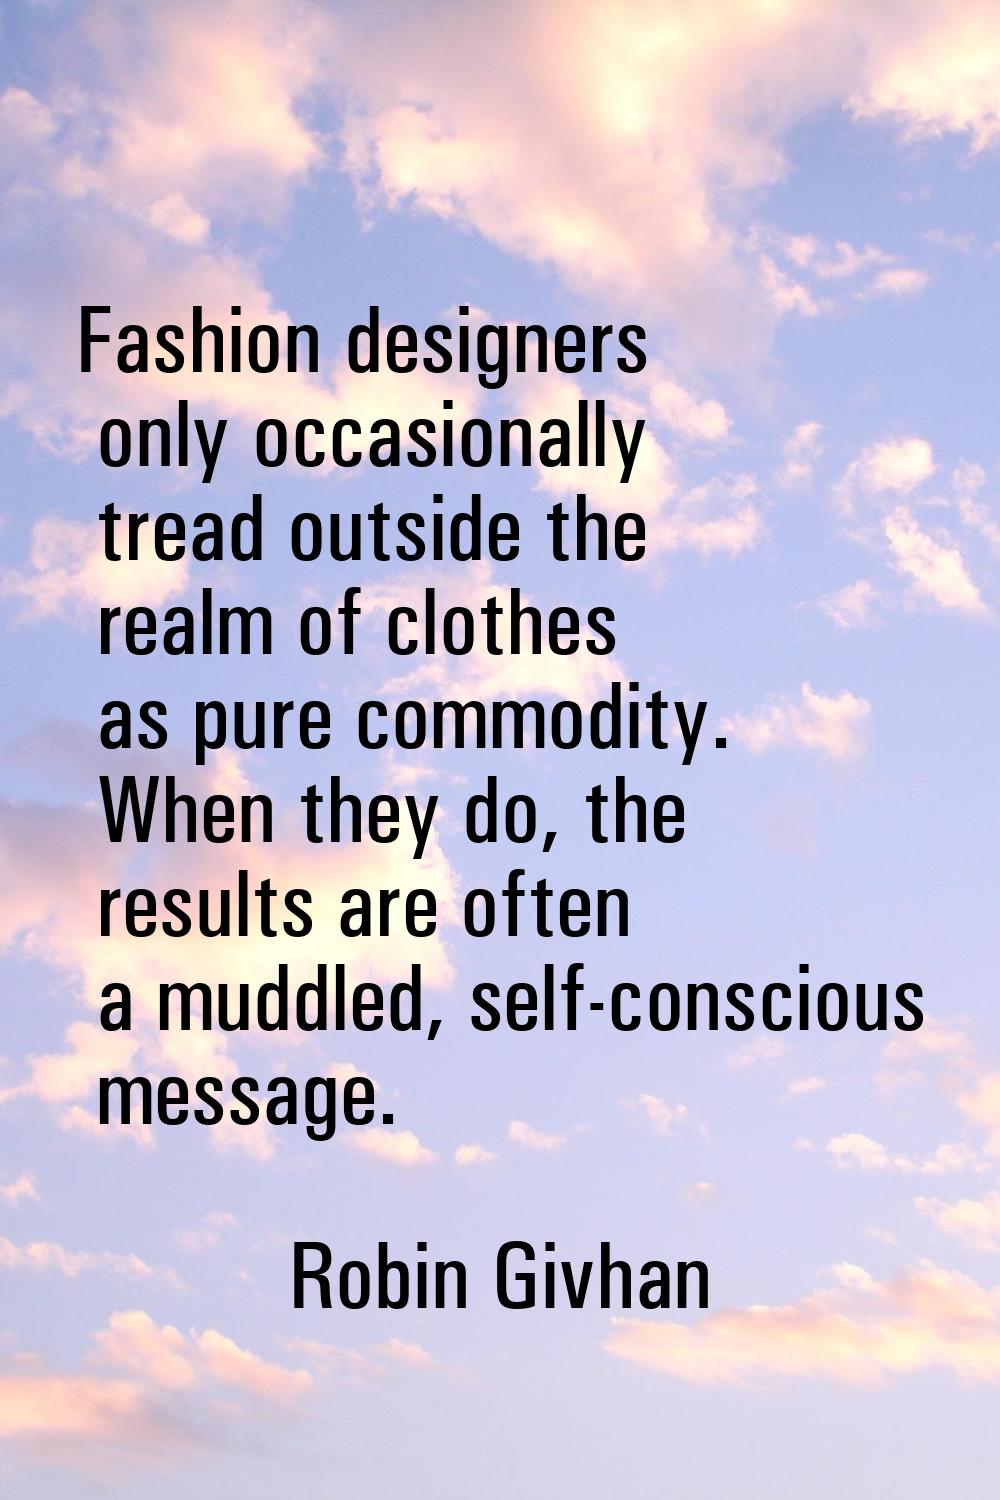 Fashion designers only occasionally tread outside the realm of clothes as pure commodity. When they